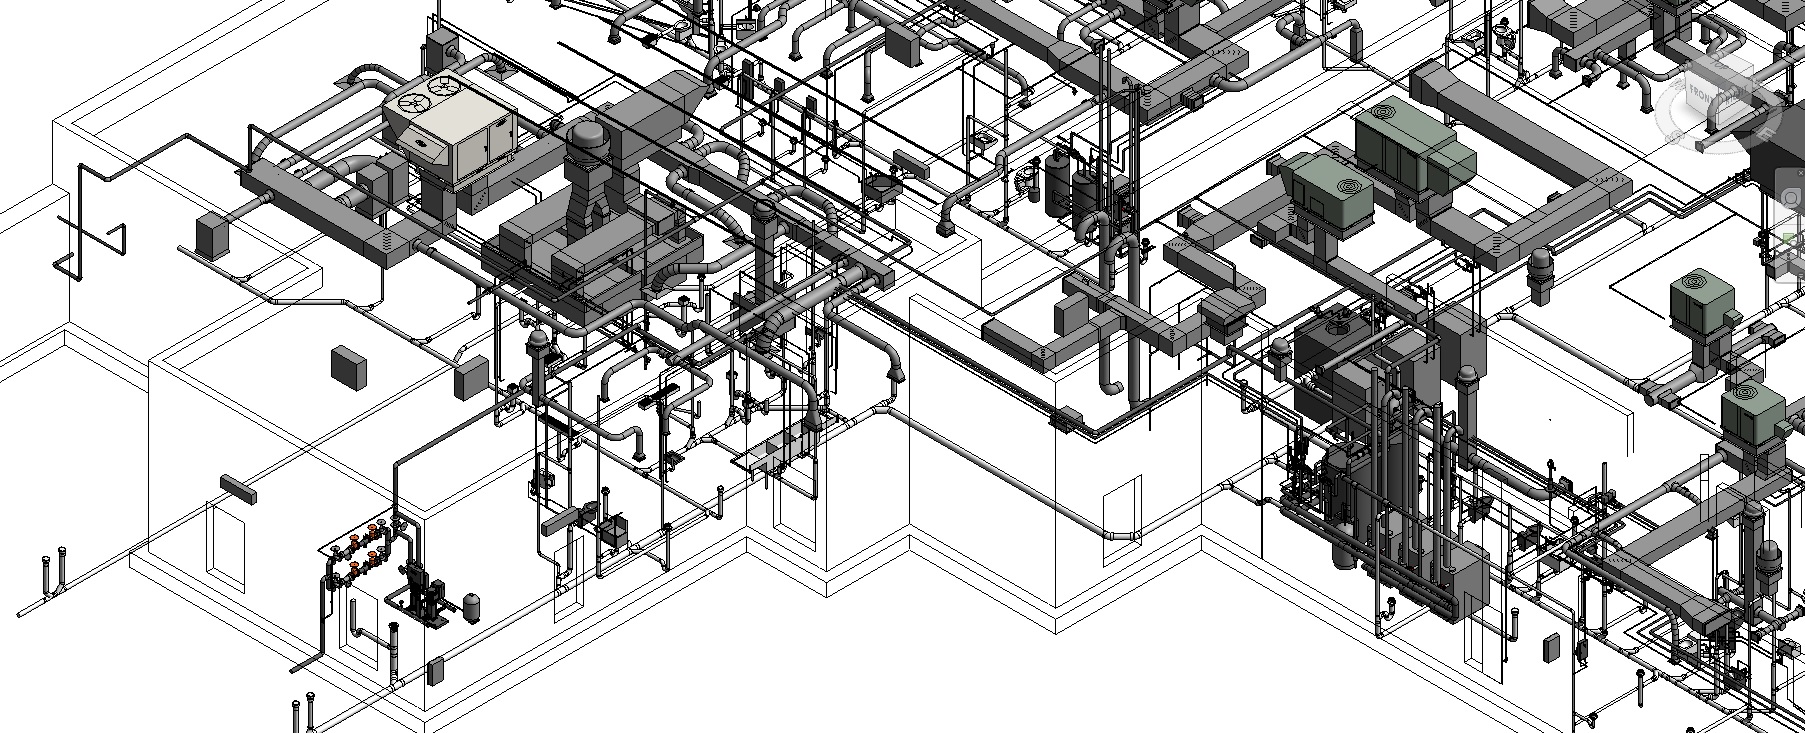 Jackson County Jail mechanical and plumbing design in Revit